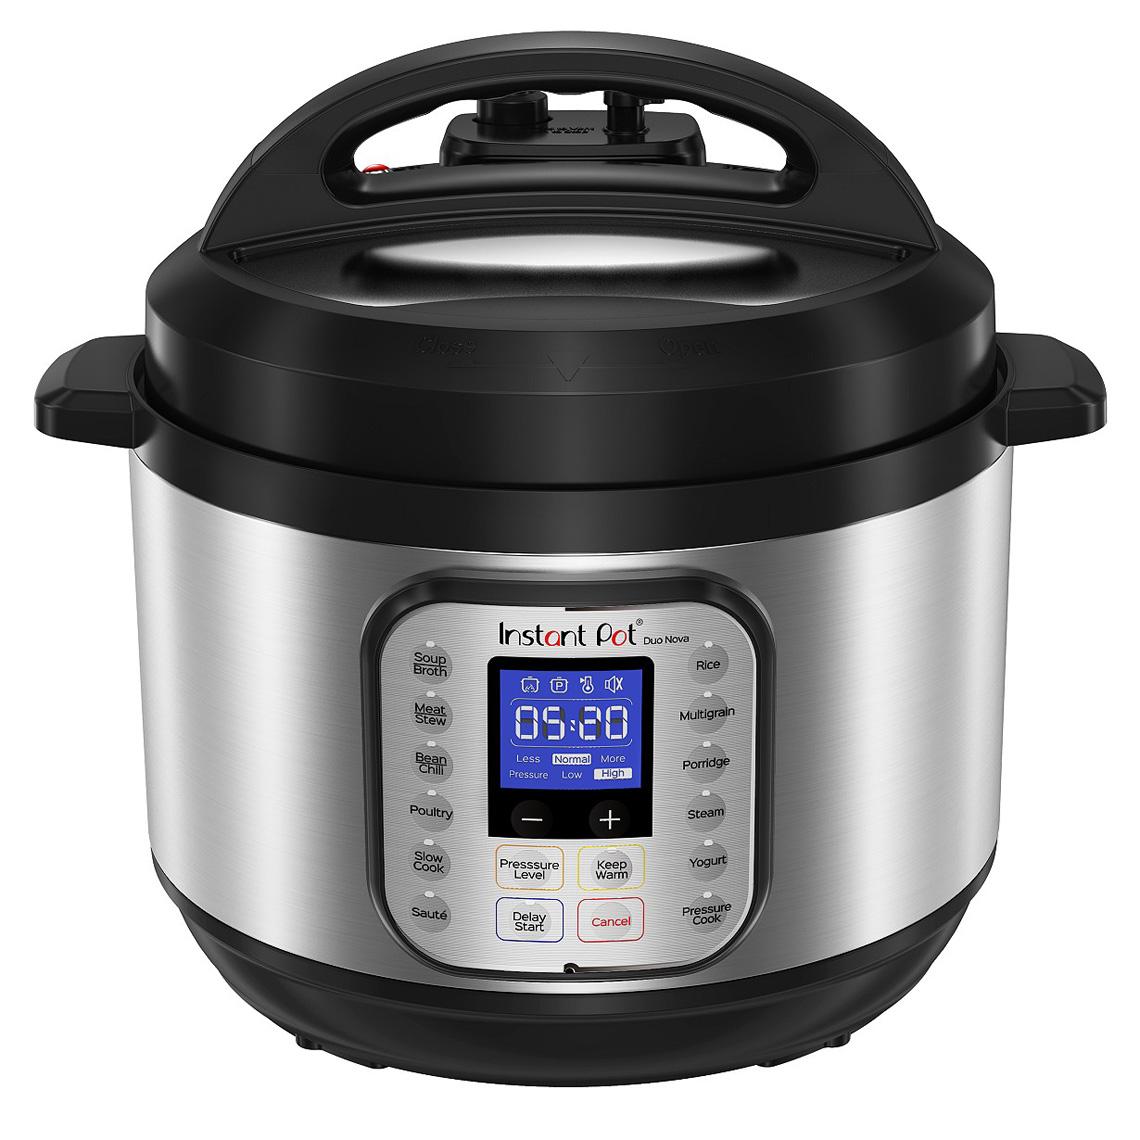 Instant Pot 10Q Duo Nova 7-in-1 Pressure Cooker for $89.99 Shipped